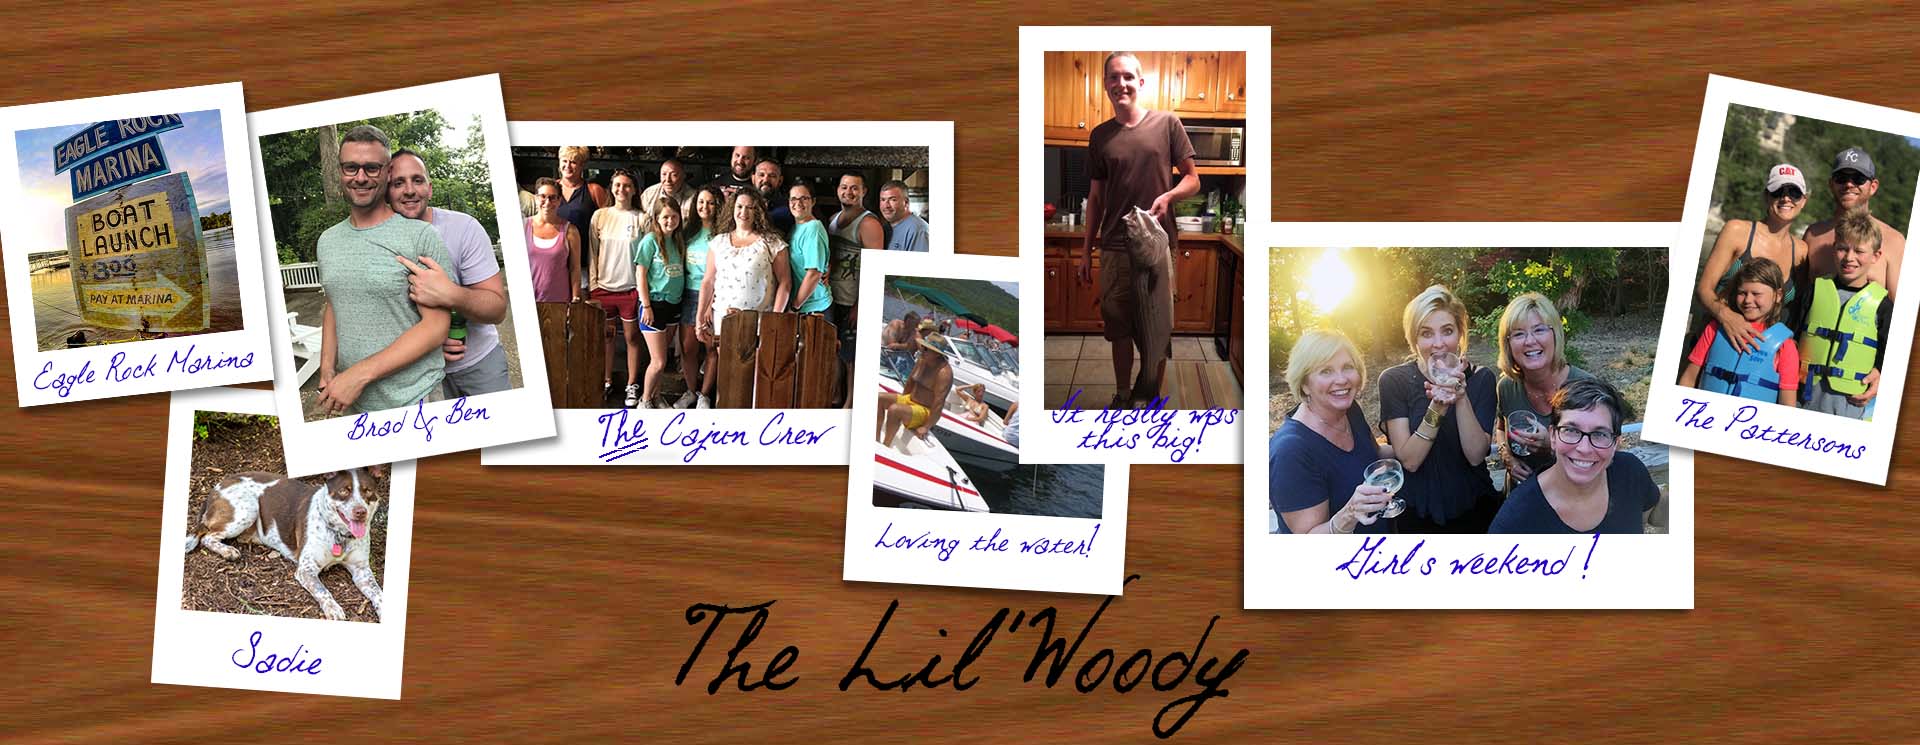 The Lil Woody photo gallery header image